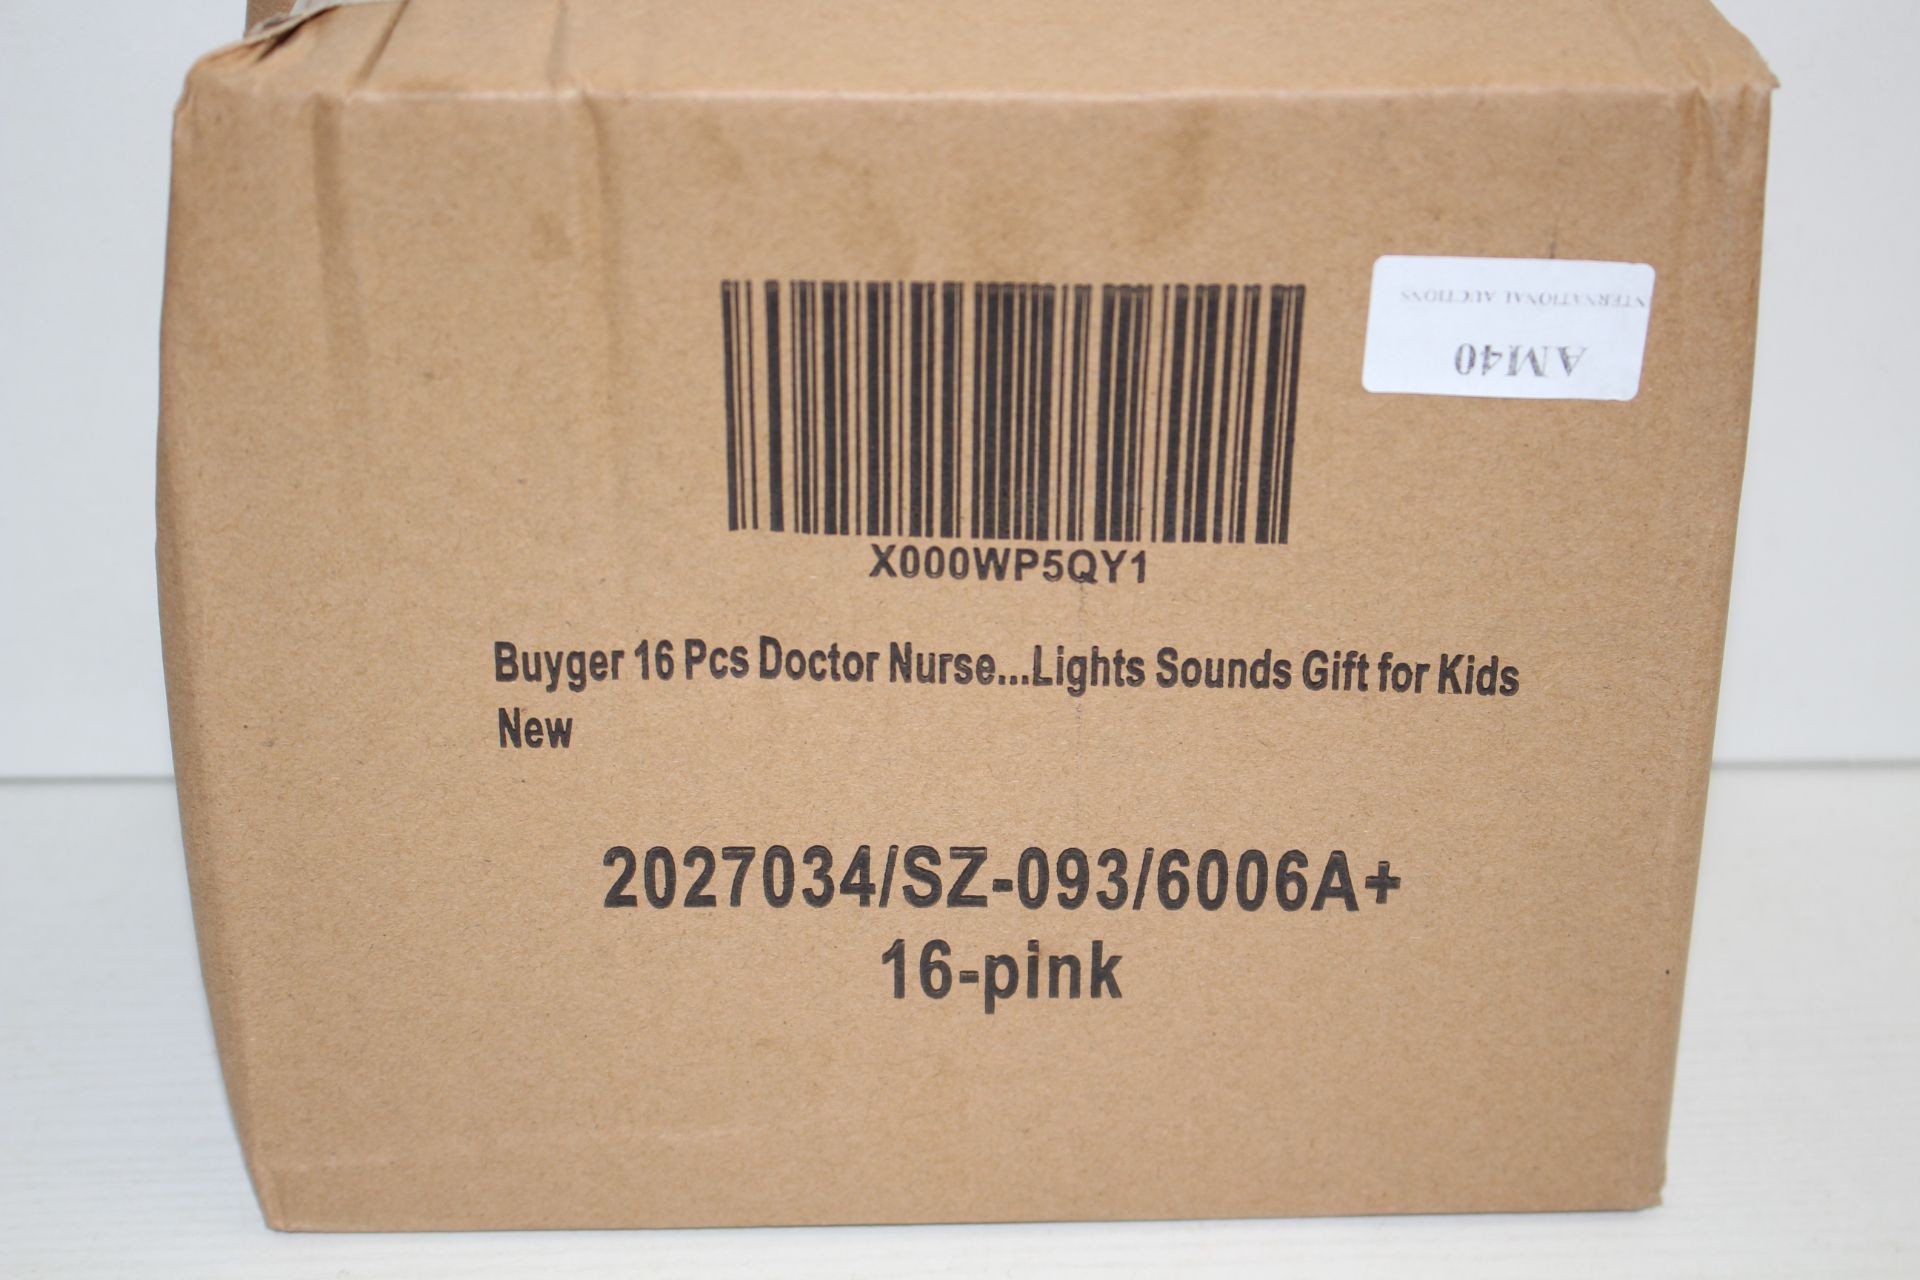 BOXED 16PC DOCTOR NURSE LIGHTS SOUNDS GIFT FOR KIDSCondition ReportAppraisal Available on Request-